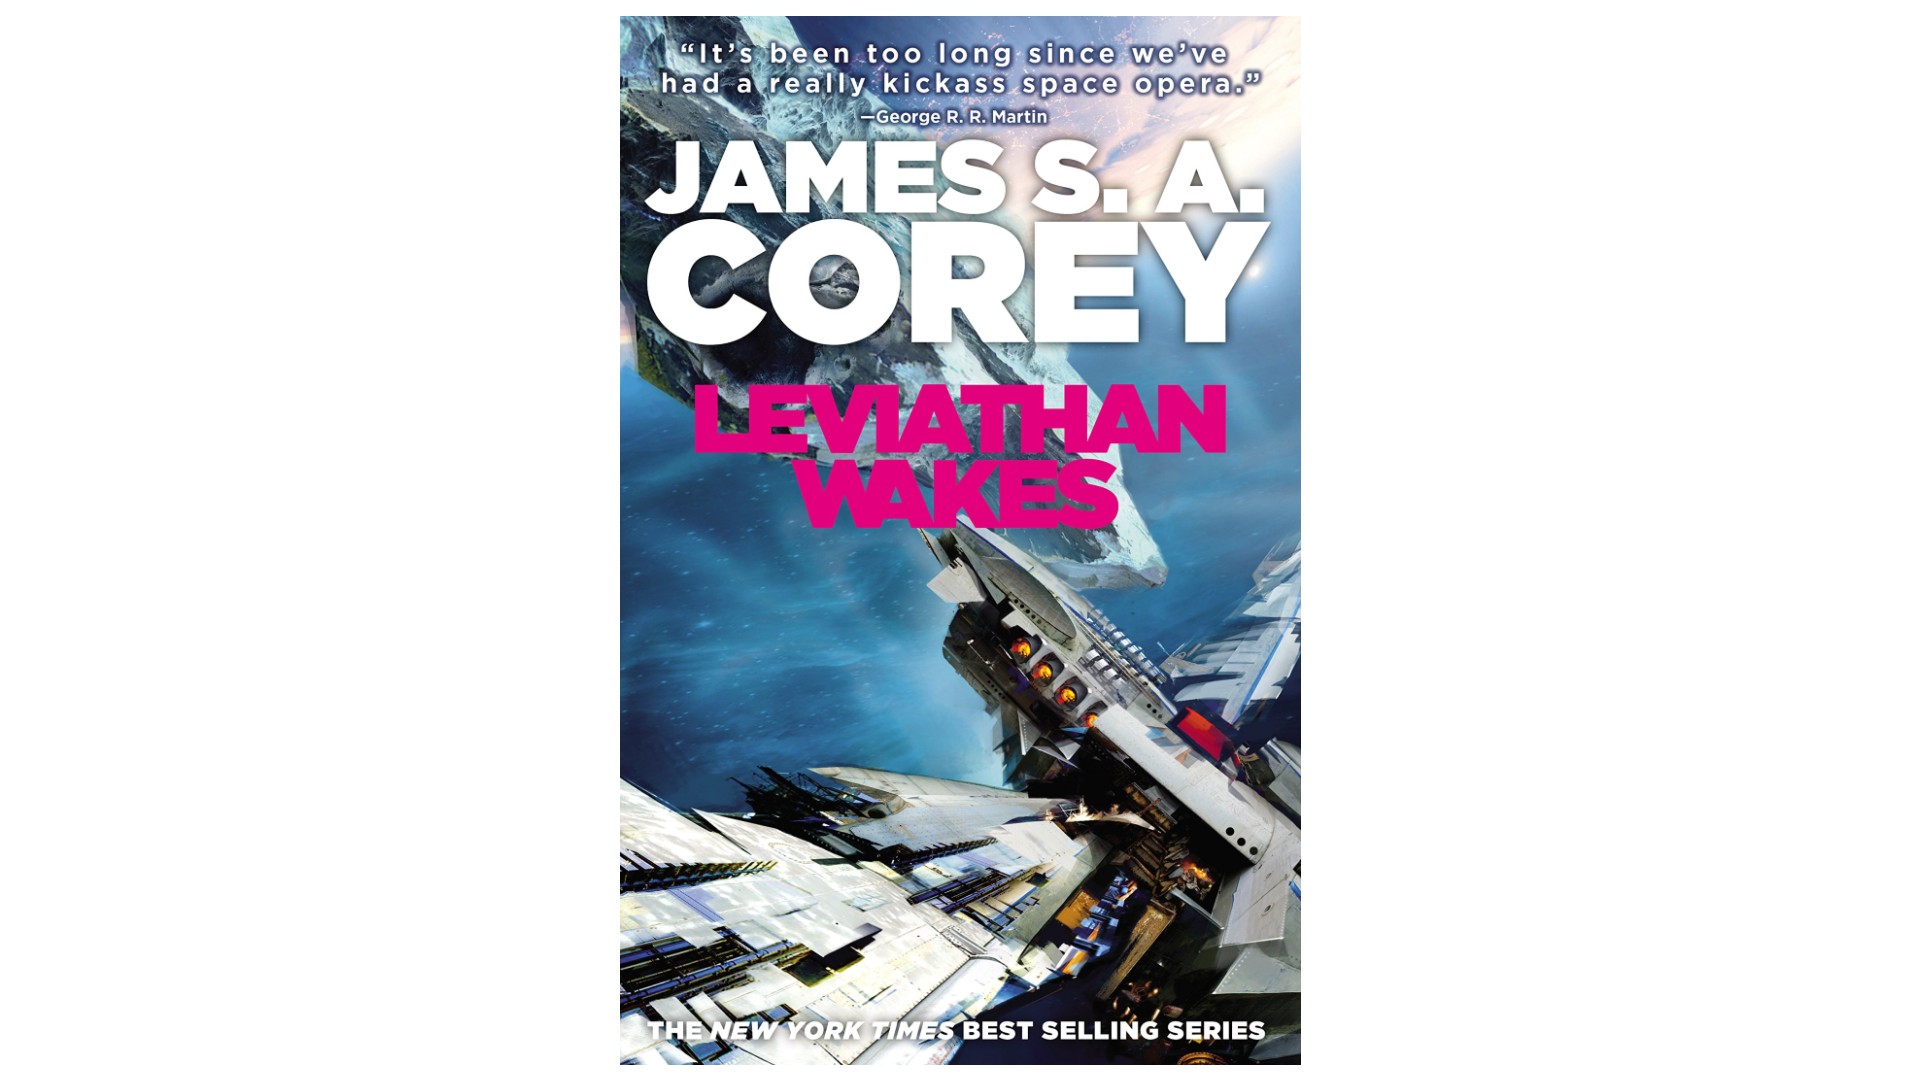 Leviathan Wakes - The Expanse series by James S. A. Corey_Orbit (2017)